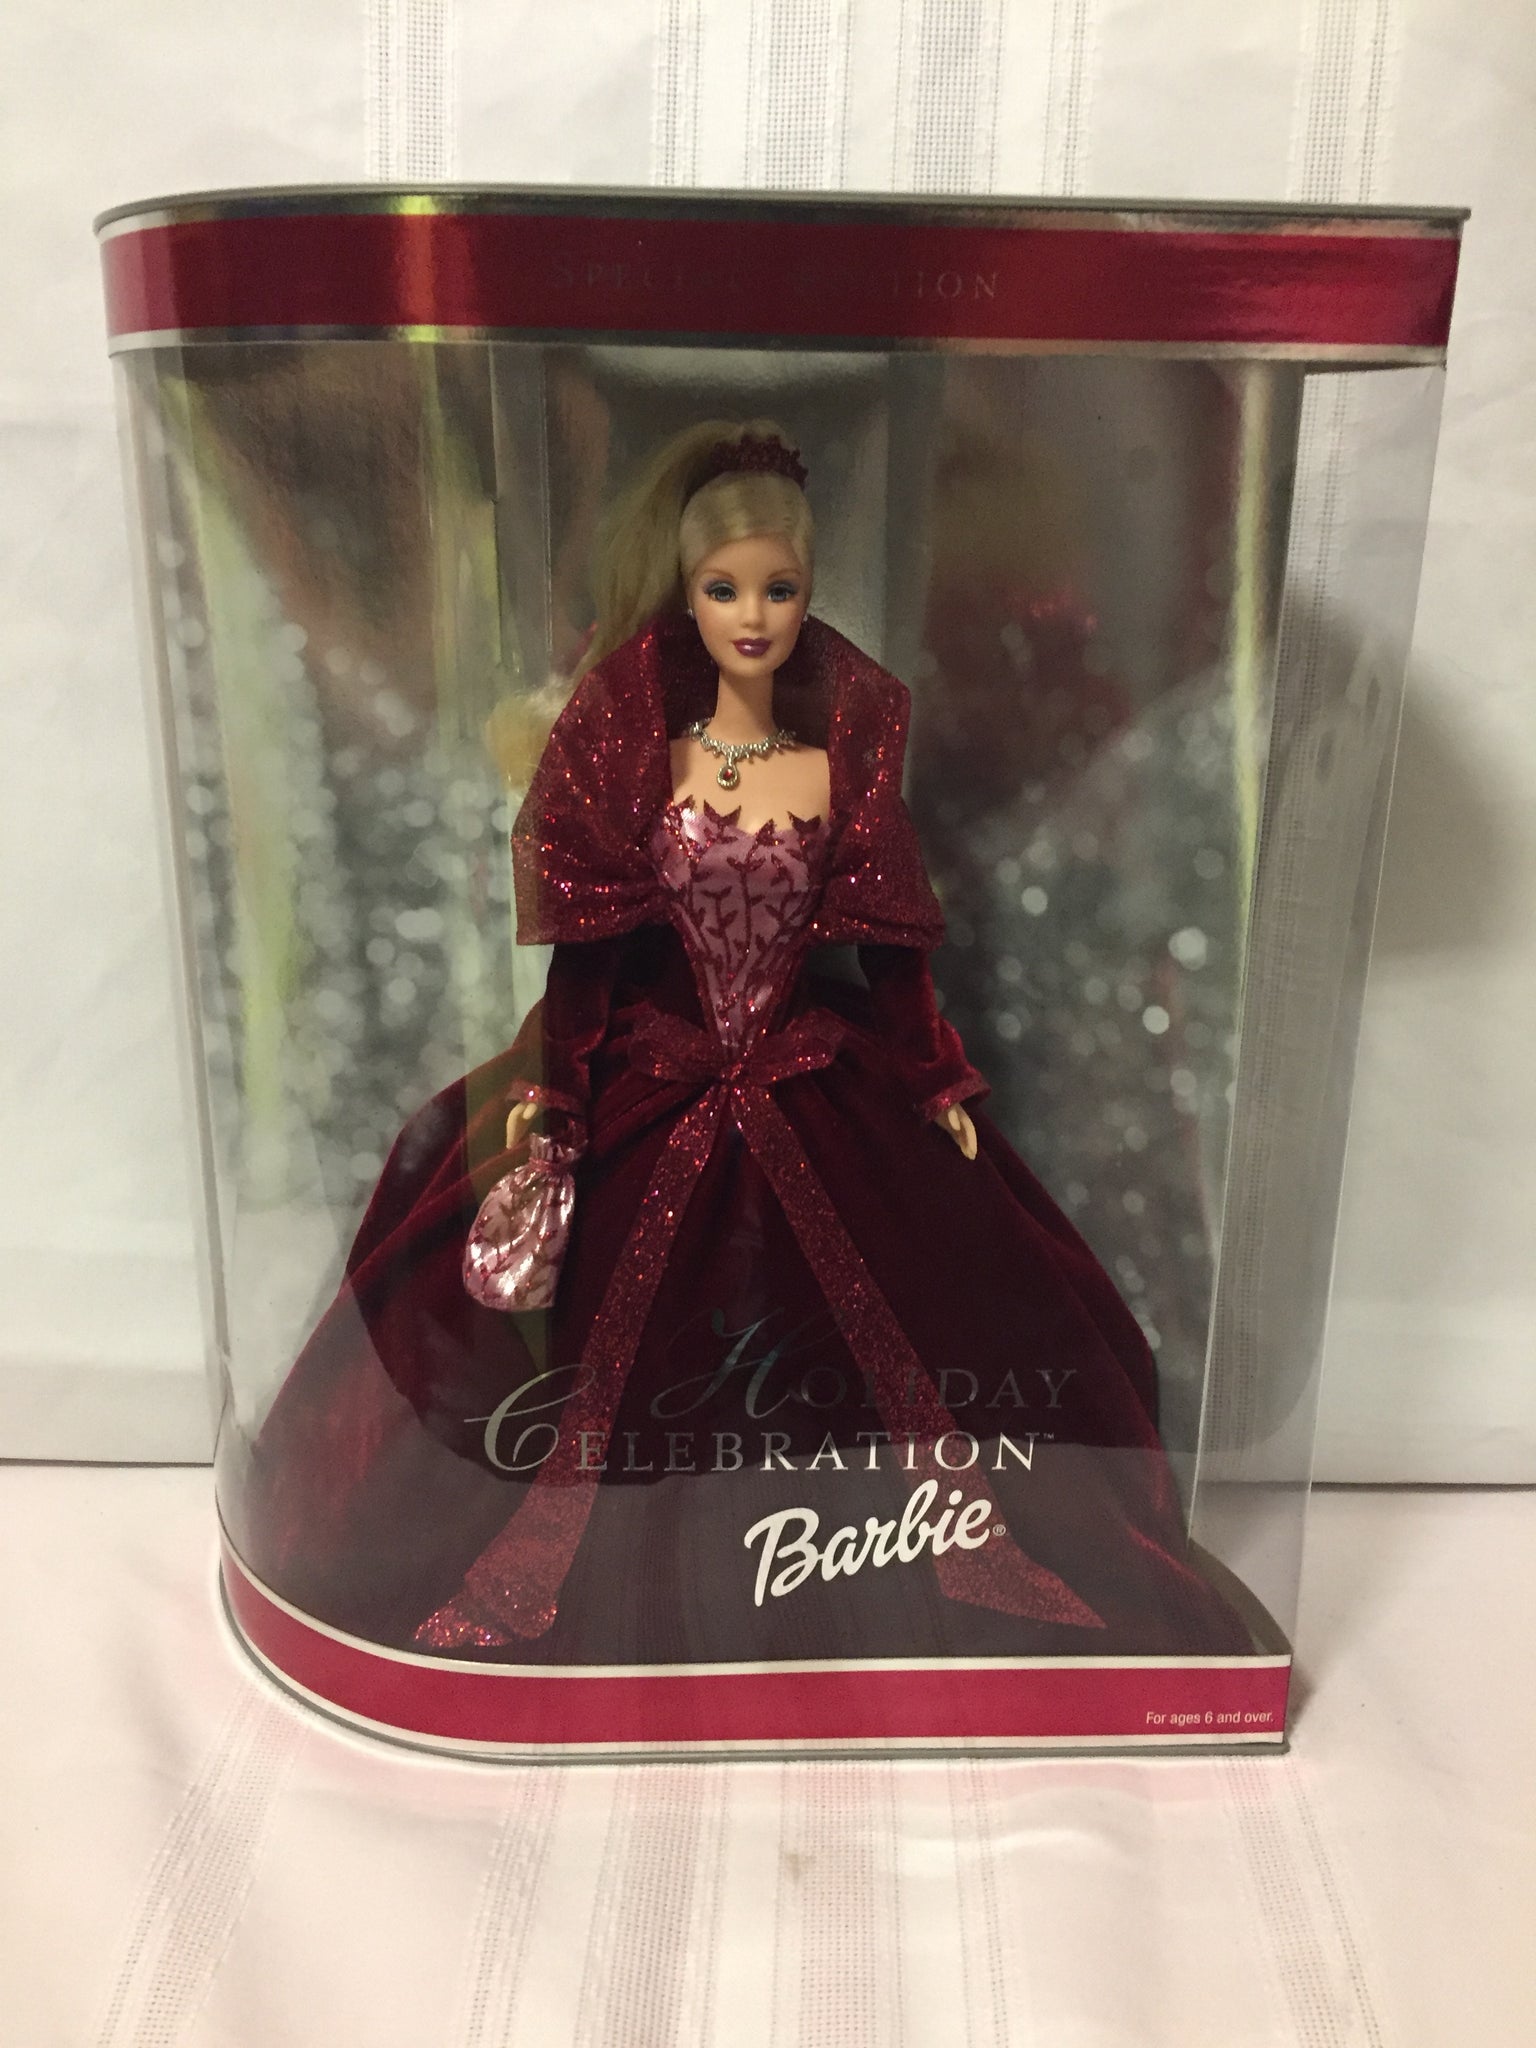 holiday special edition barbie